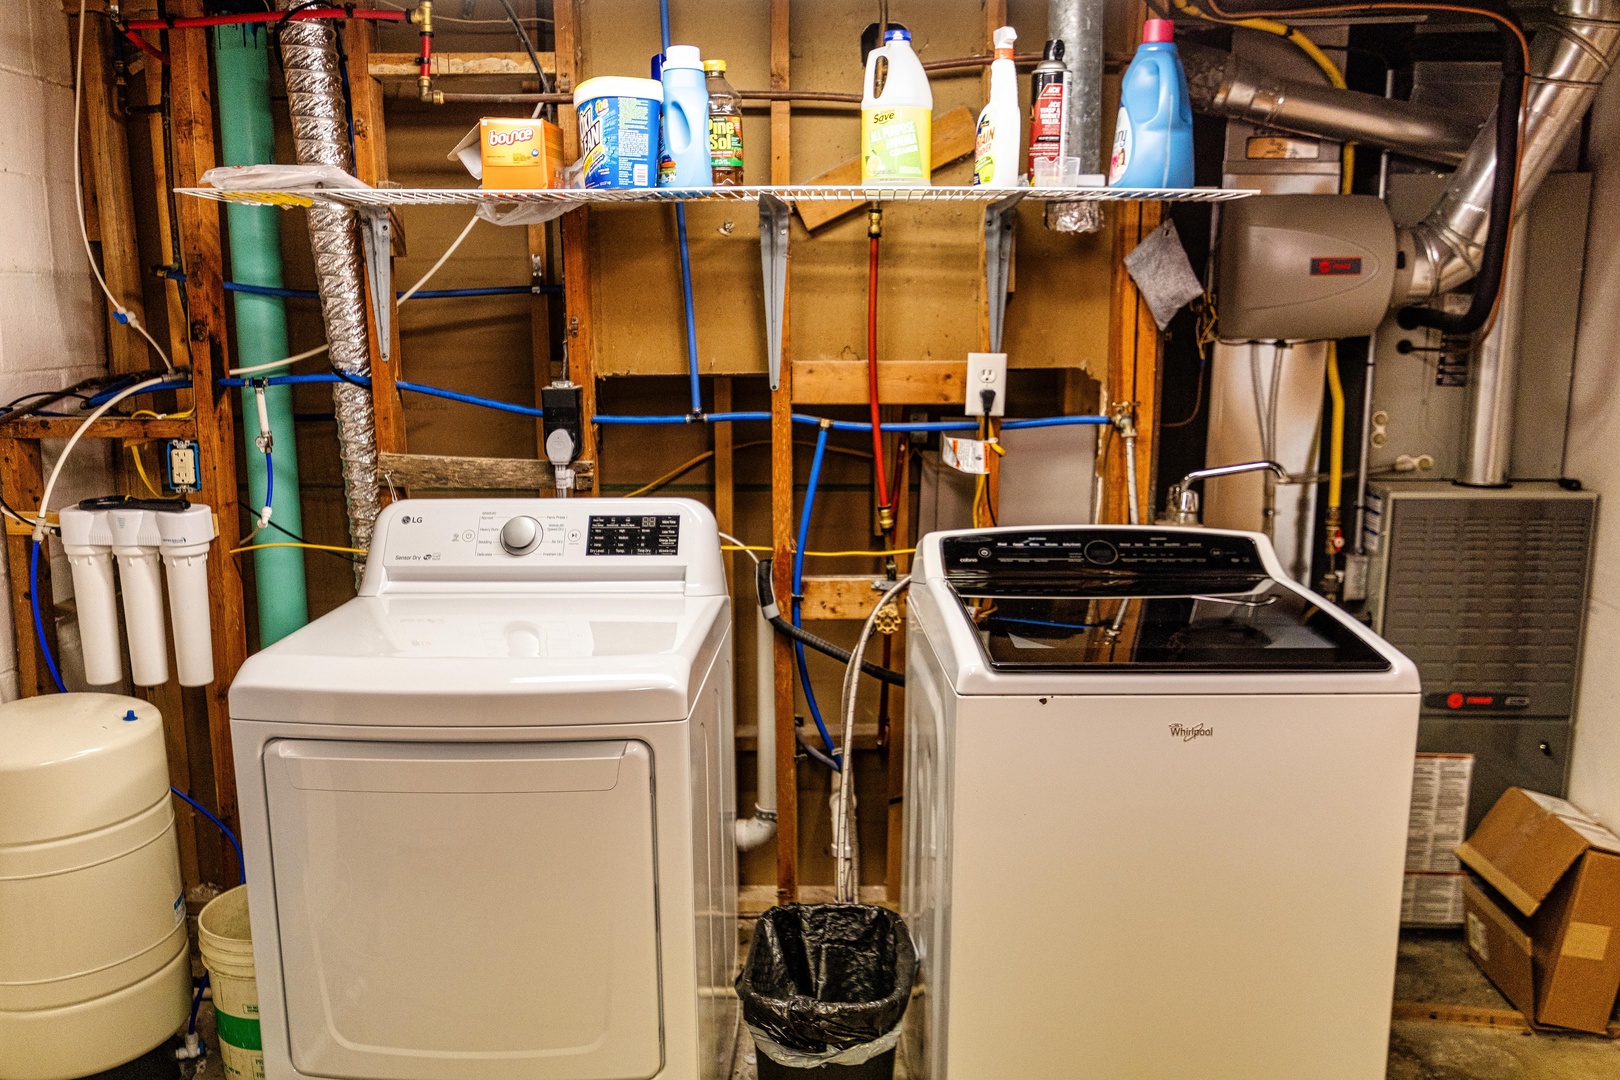 Maximized convenience with a fill-sized washer and dryer